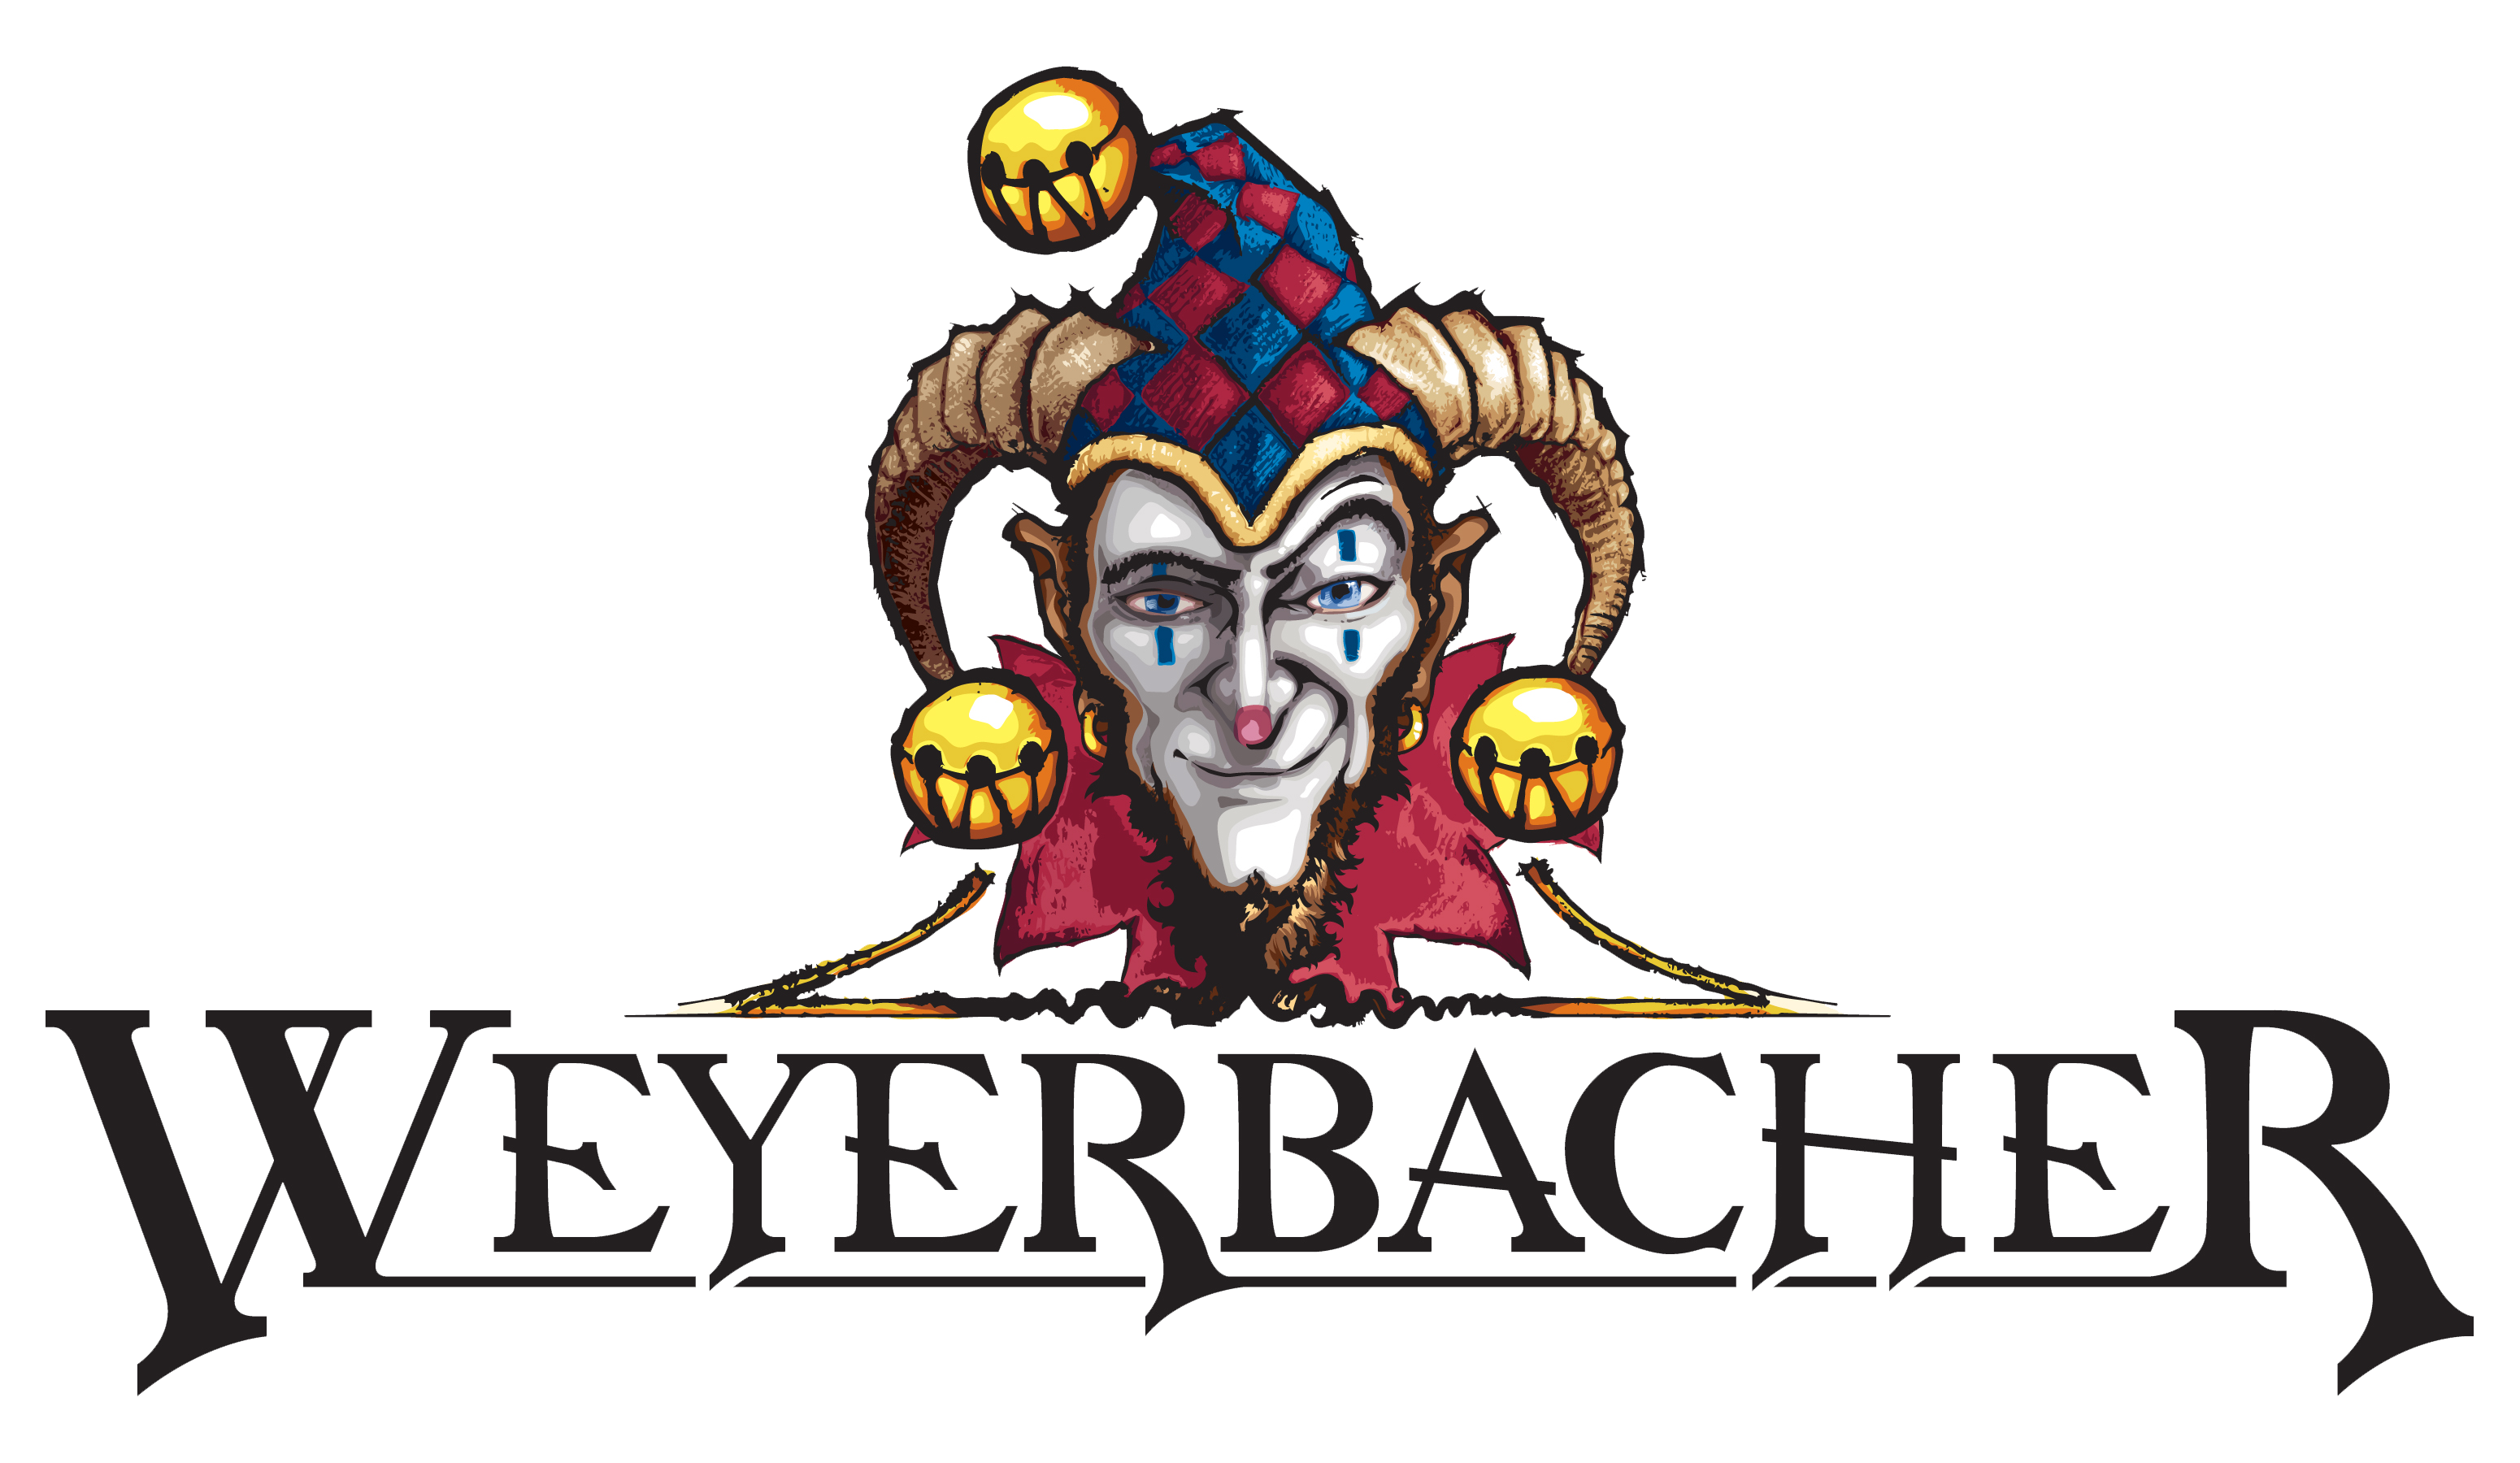 Weyerbacher Brewing Company was founded in 1995 by Dan and Sue Weirback